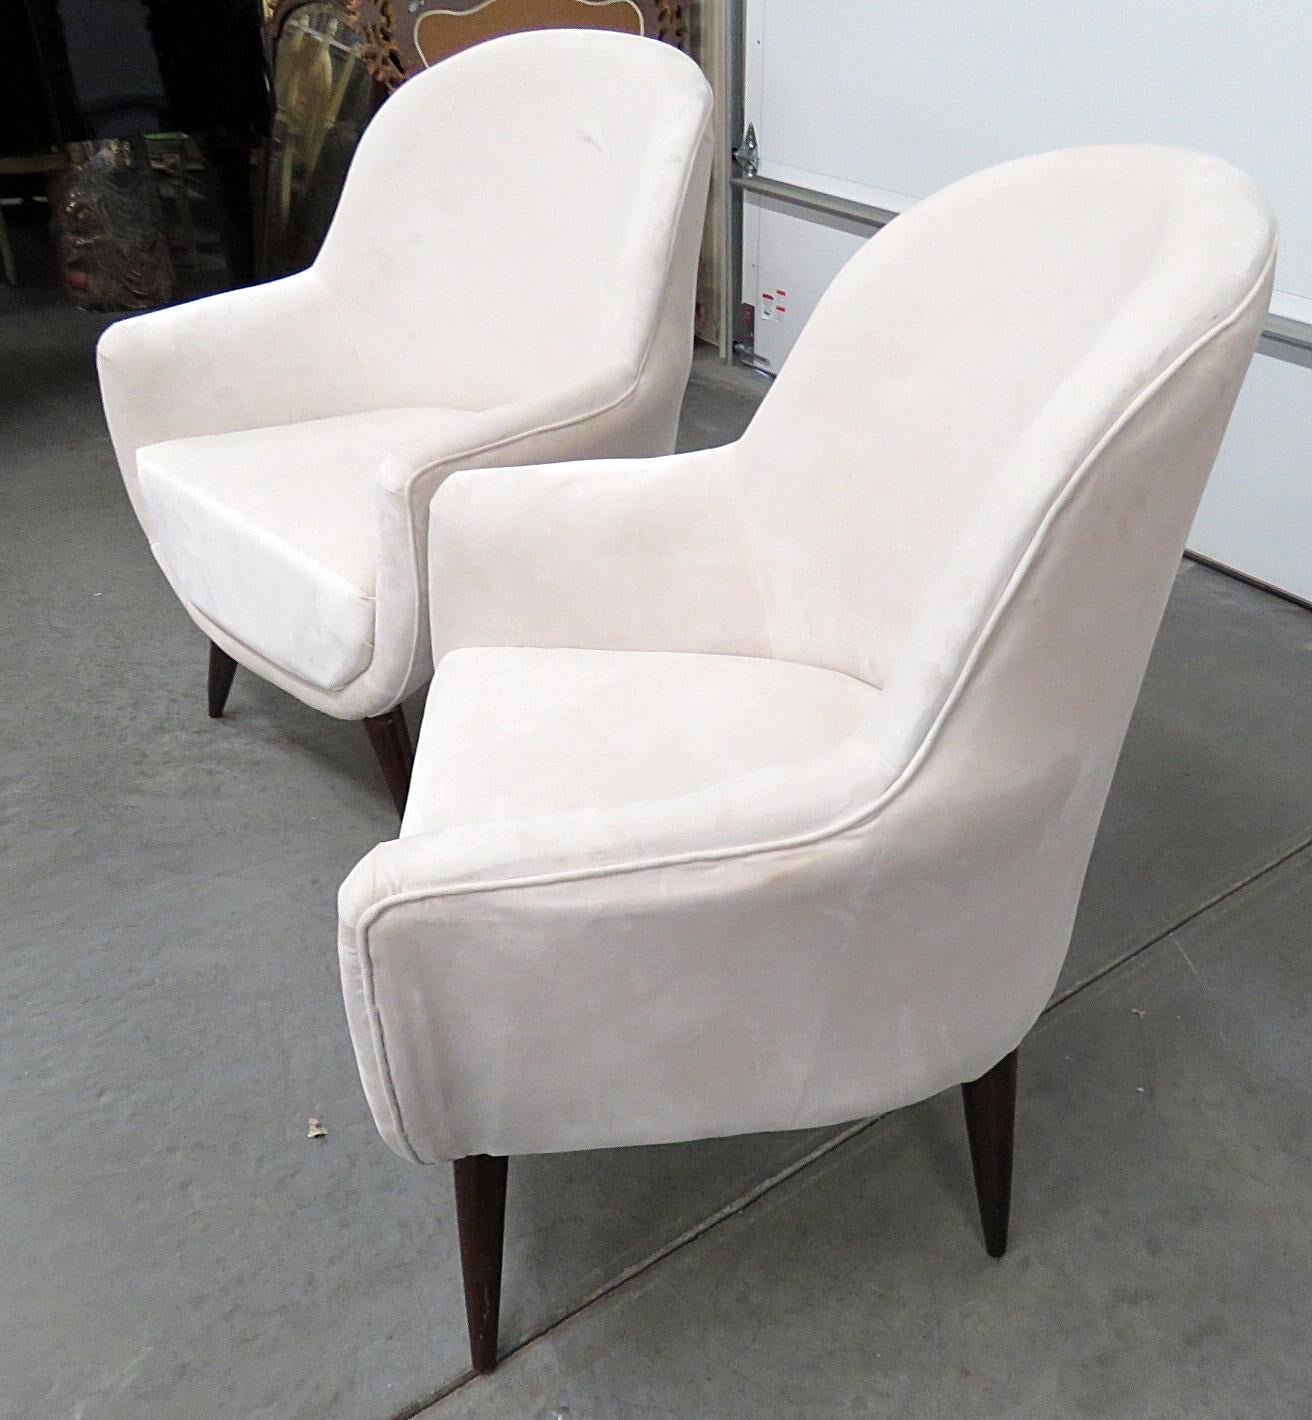 Pair of Mid-Century Modern upholstered club chairs with wooden legs.